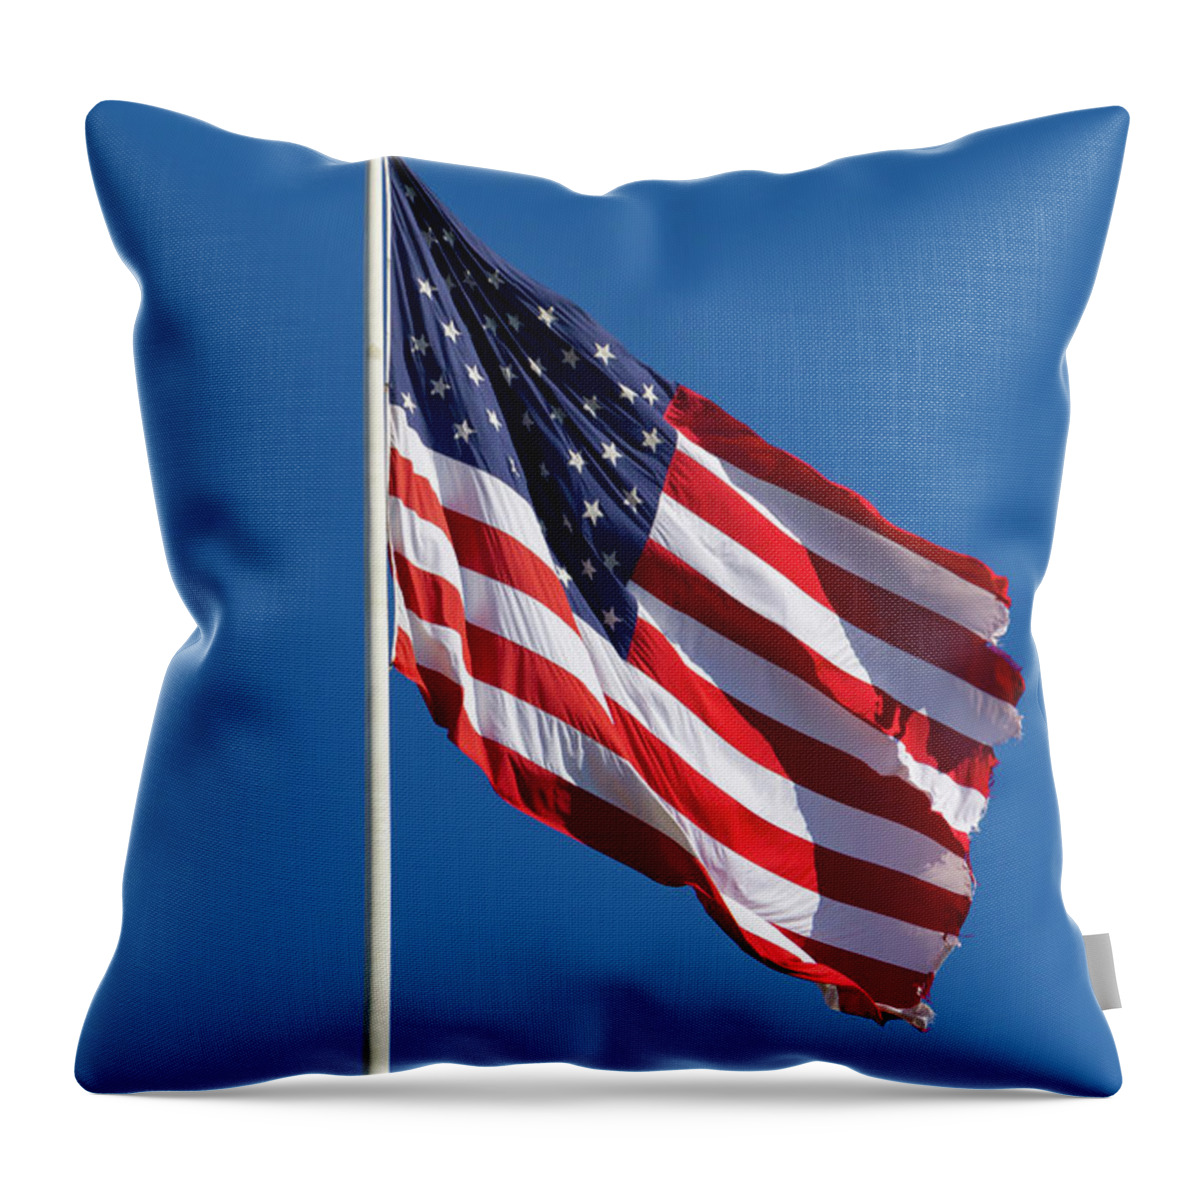 Long May She Wave Throw Pillow featuring the photograph Long May She Wave by Bonnie Follett